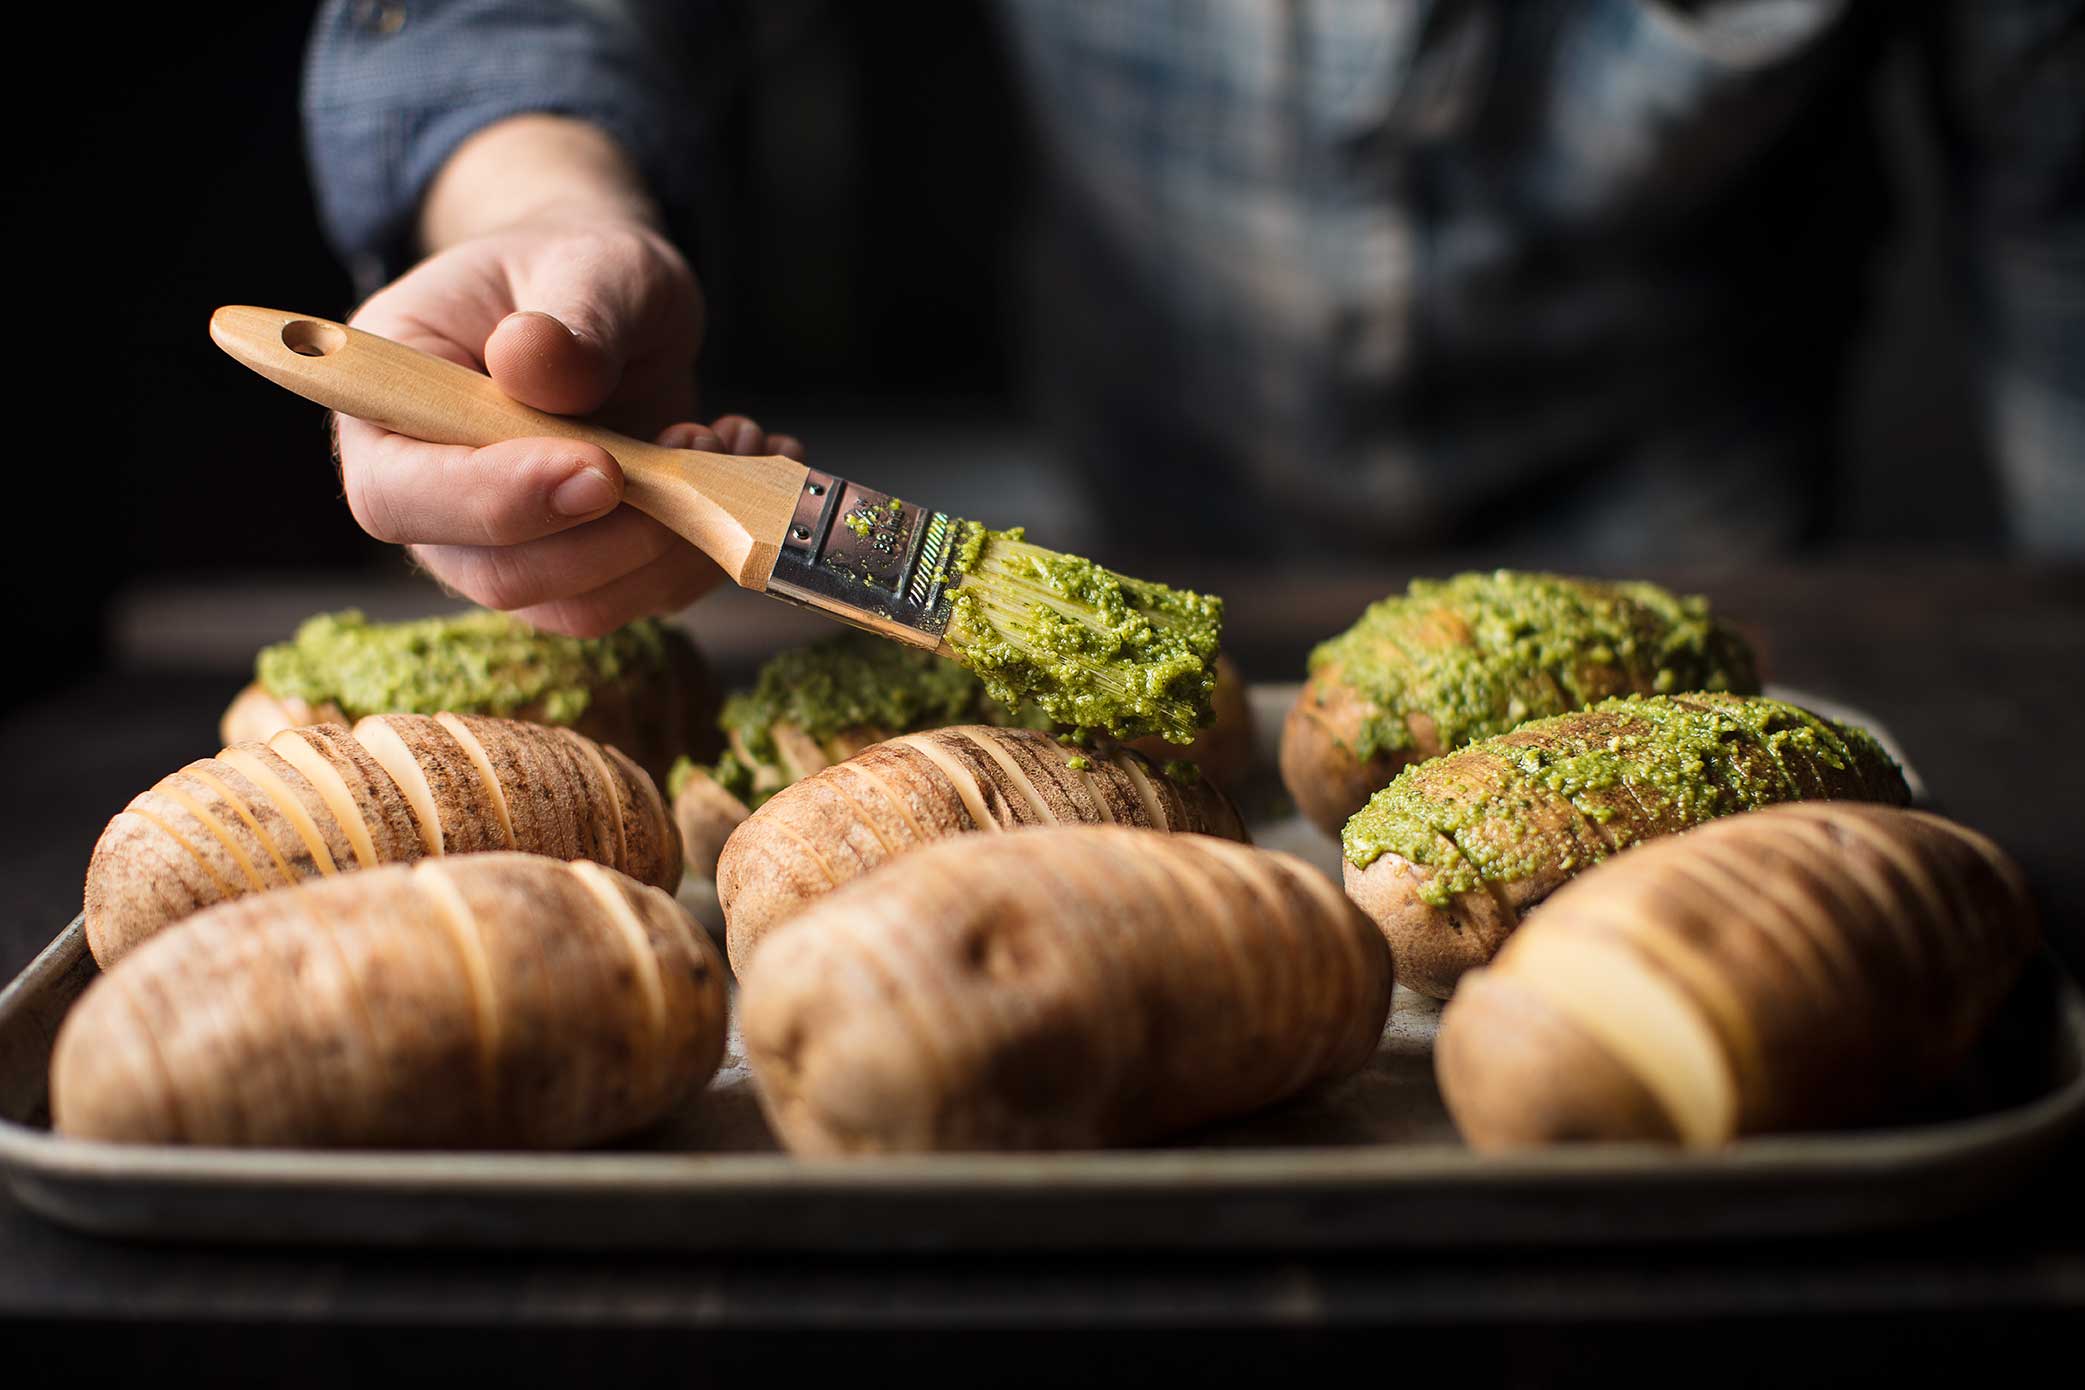 Pesto and Hasselback Potatoes photographed using the Canon 50mm f1.2L